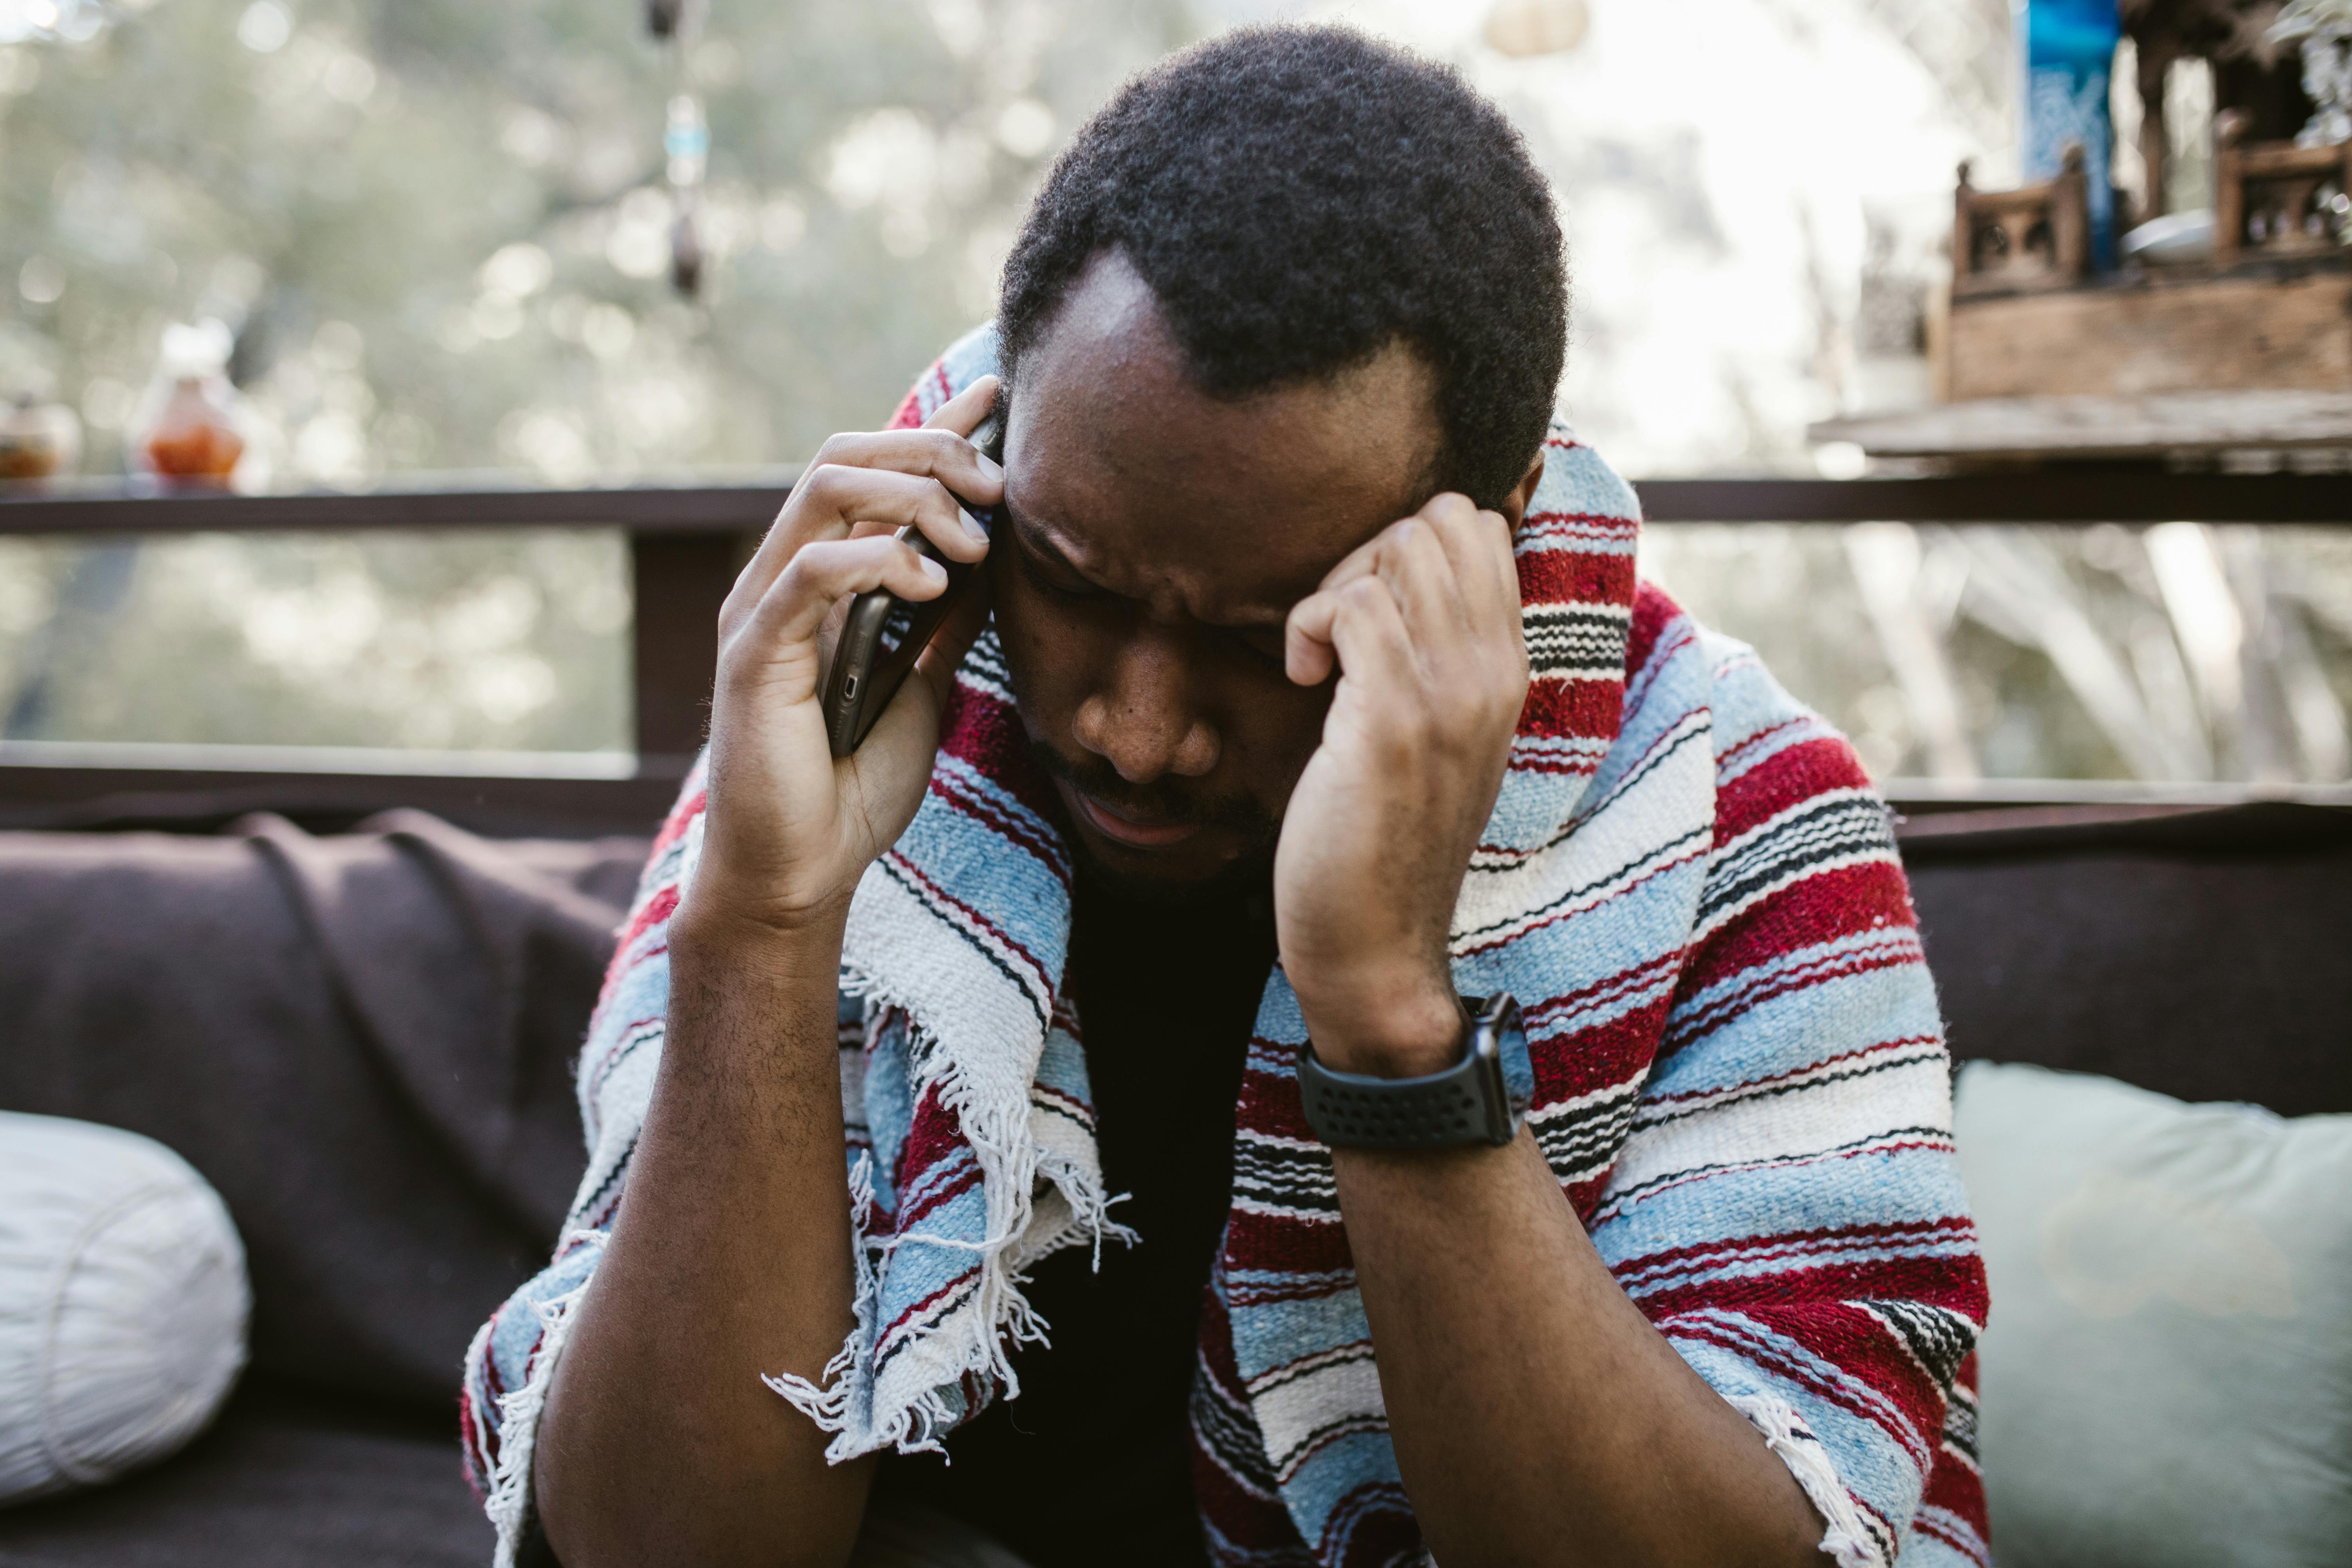 An upset man talking on the phone | Source: Pexels